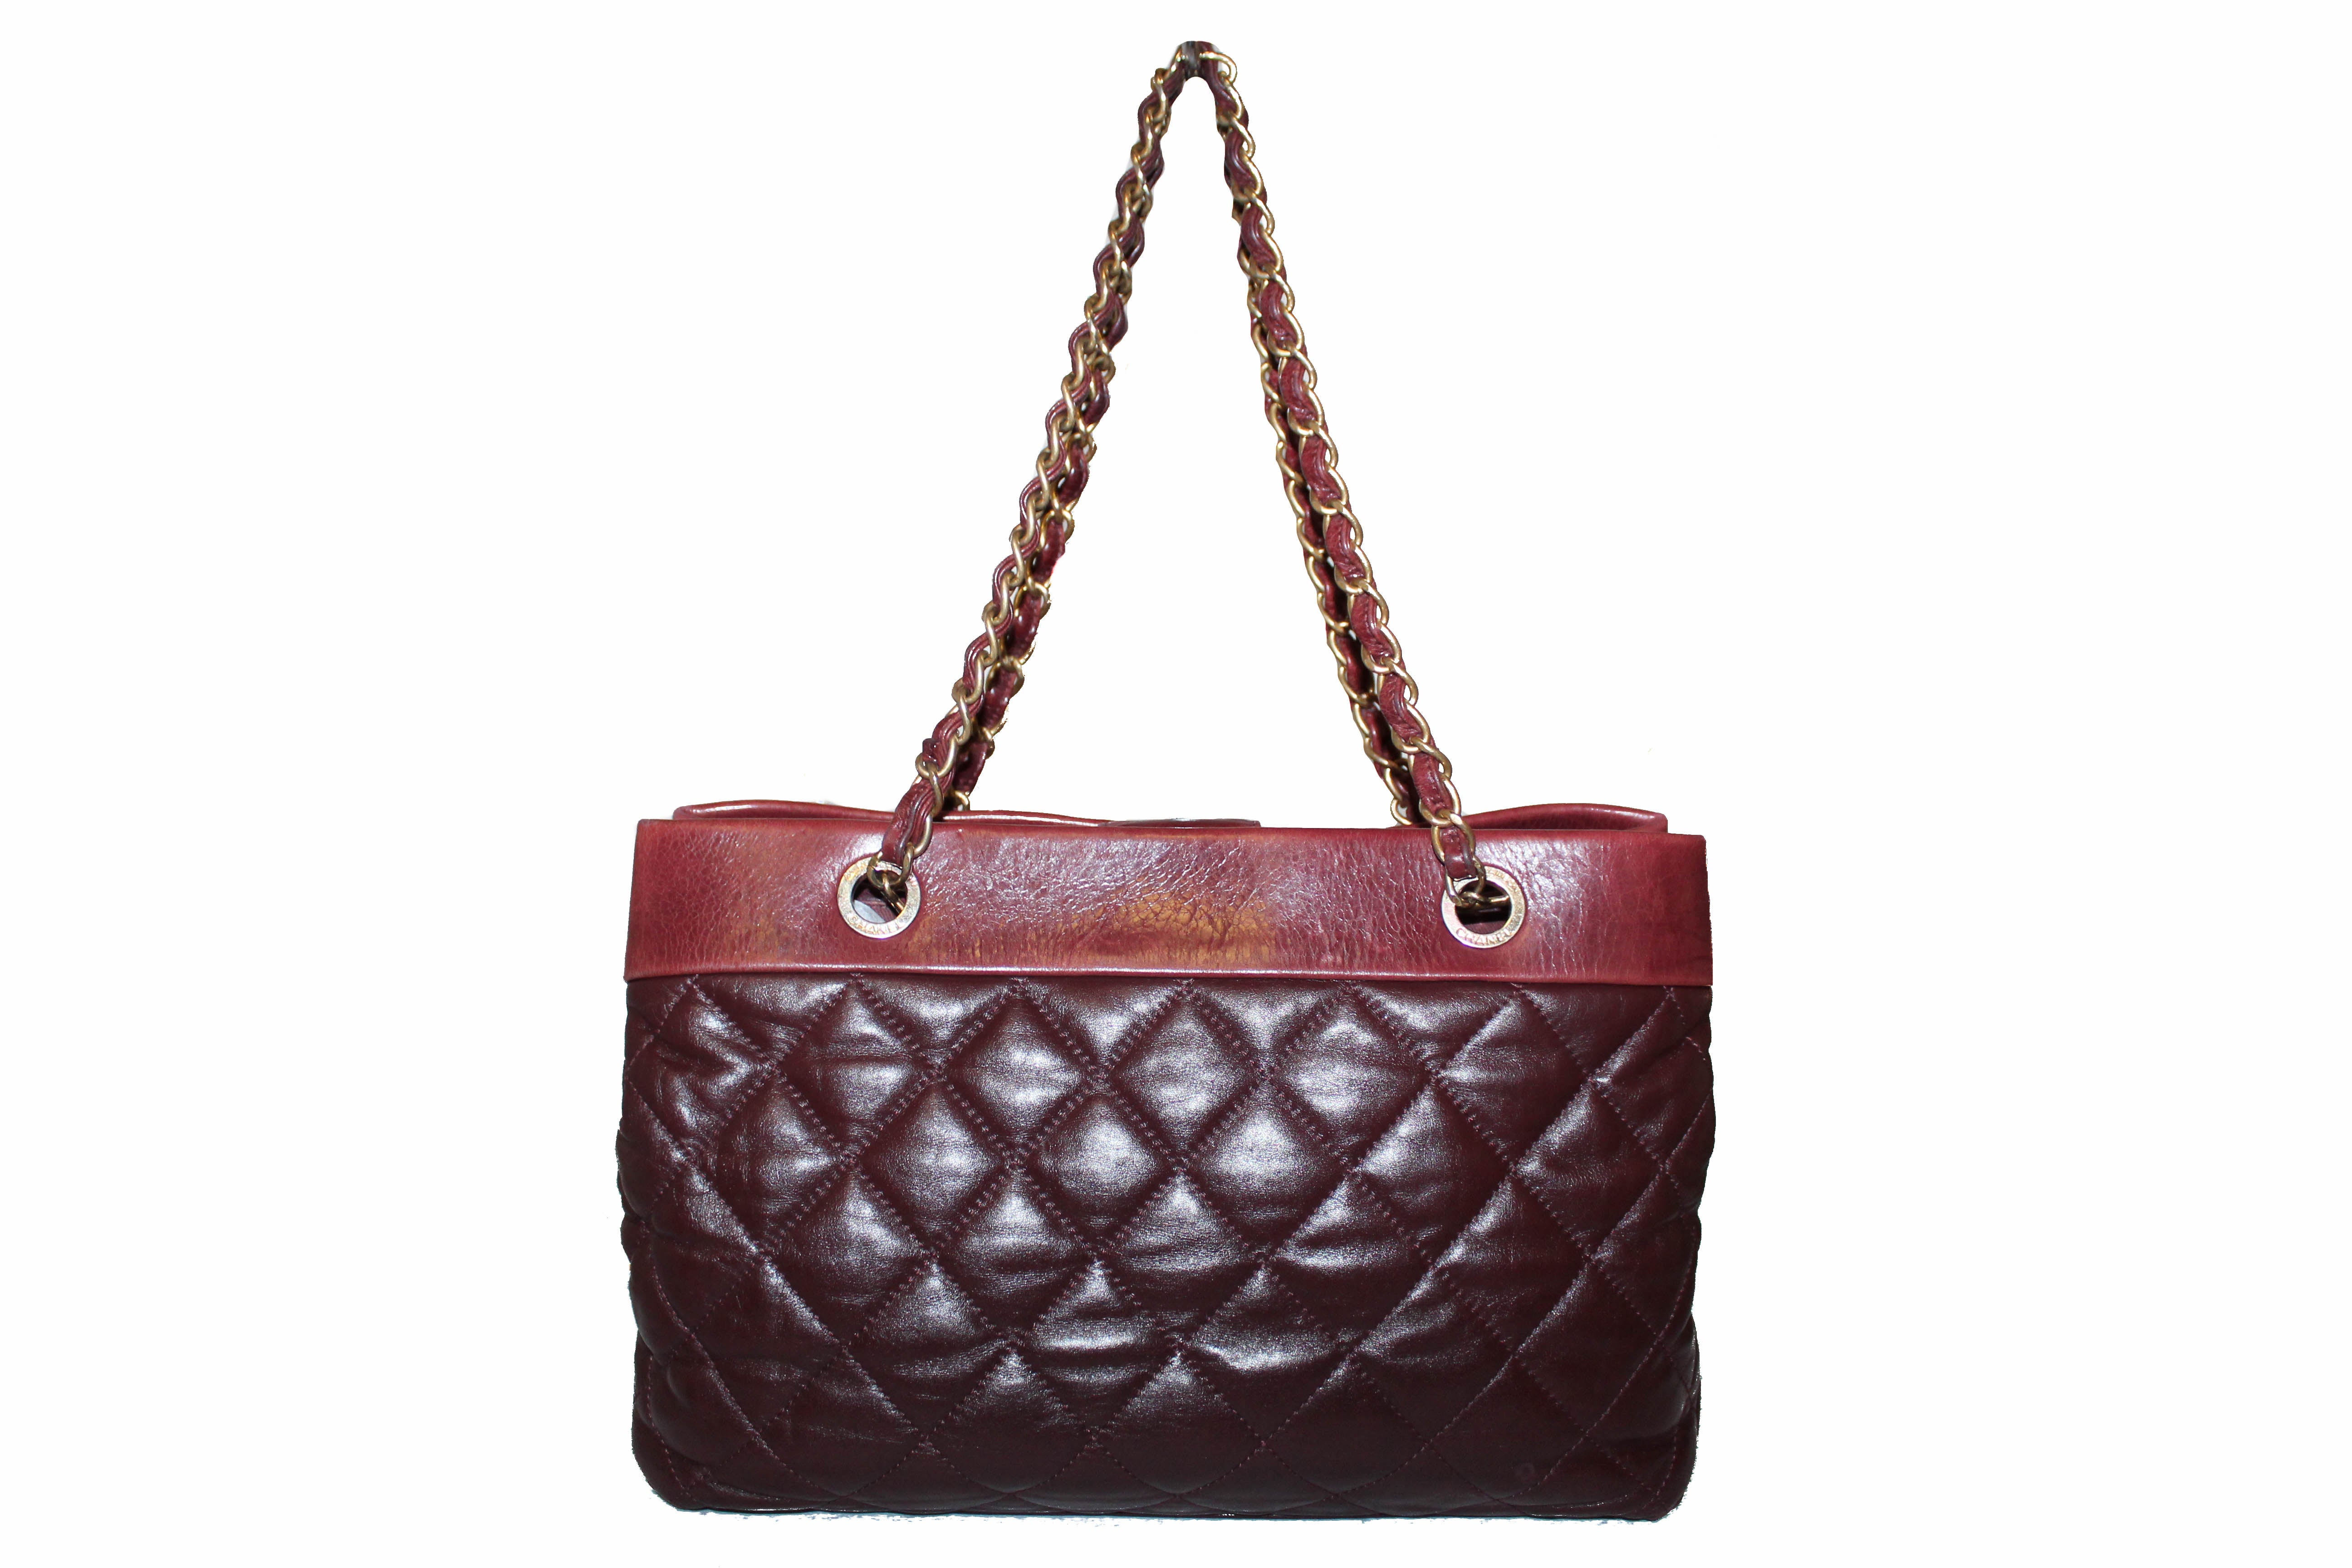 Authentic Chanel 31 Rue Cambon Paris Burgundy Distressed Leather